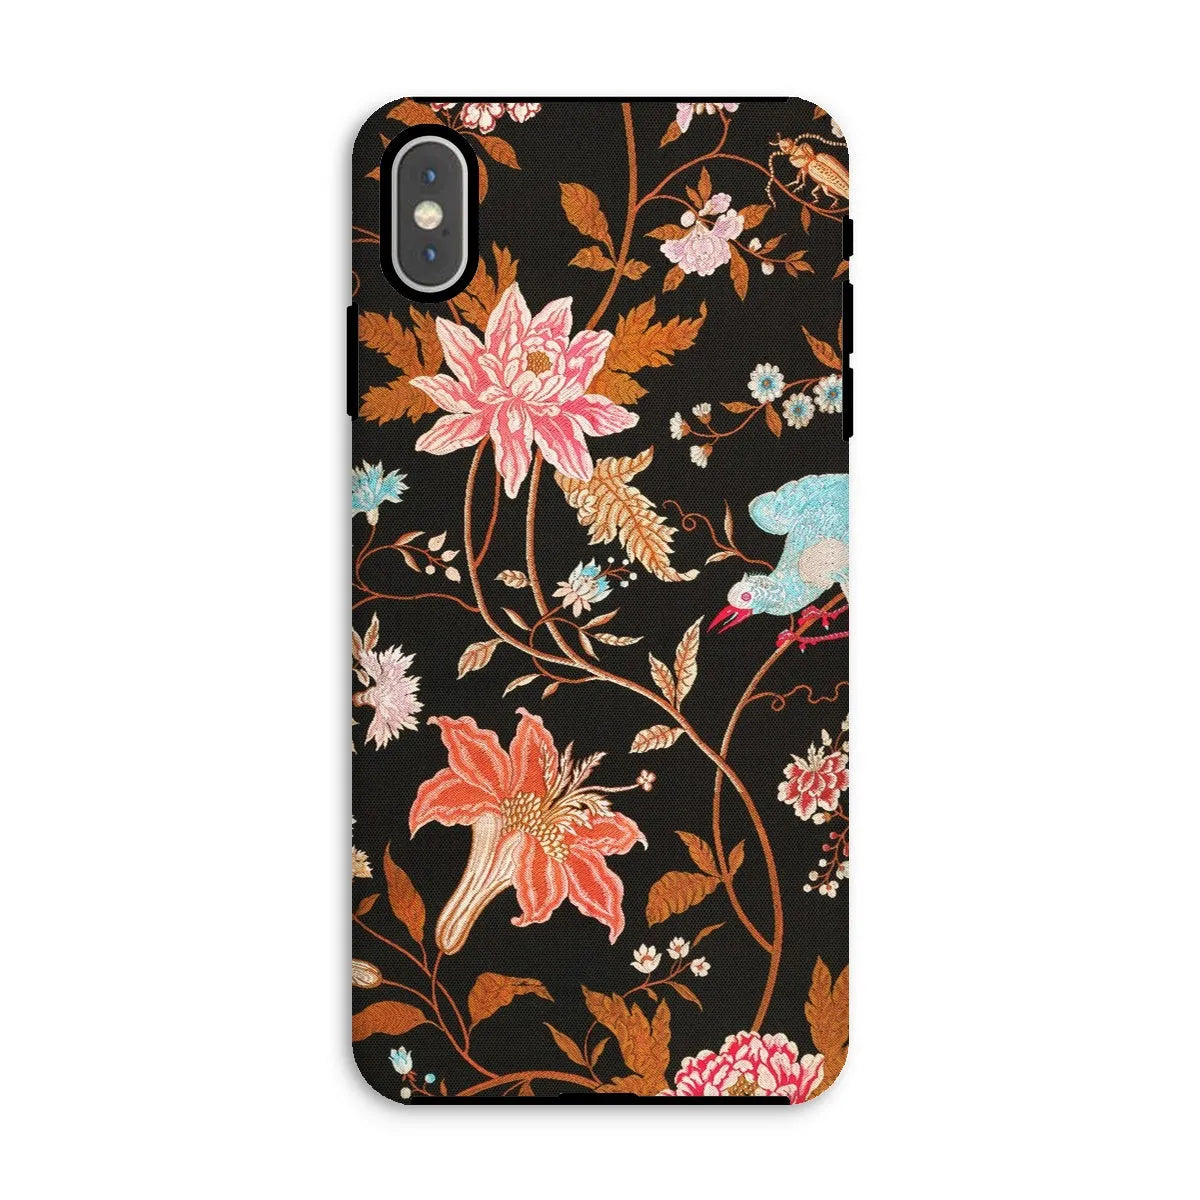 Midnight Call - Indian Aesthetic Fabric Art Phone Case - Iphone Xs Max / Matte - Mobile Phone Cases - Aesthetic Art